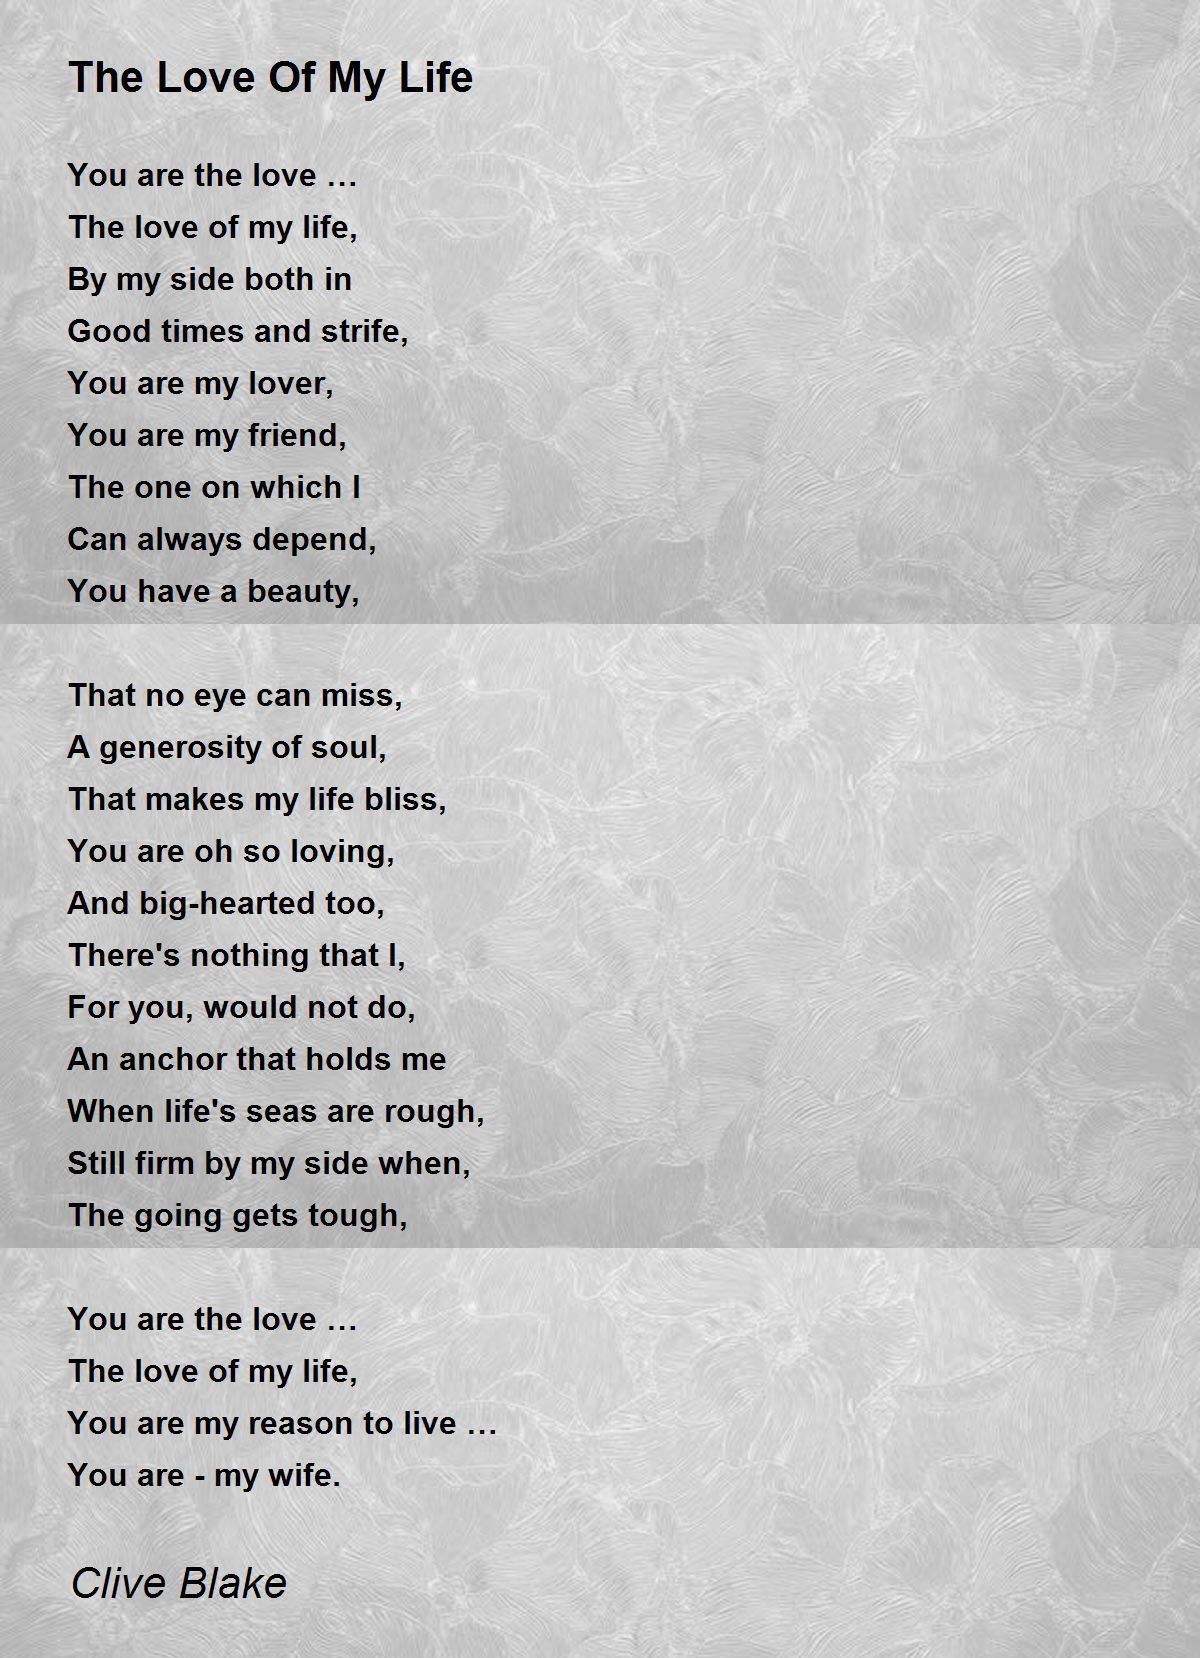 Relationship poems rough Poem About